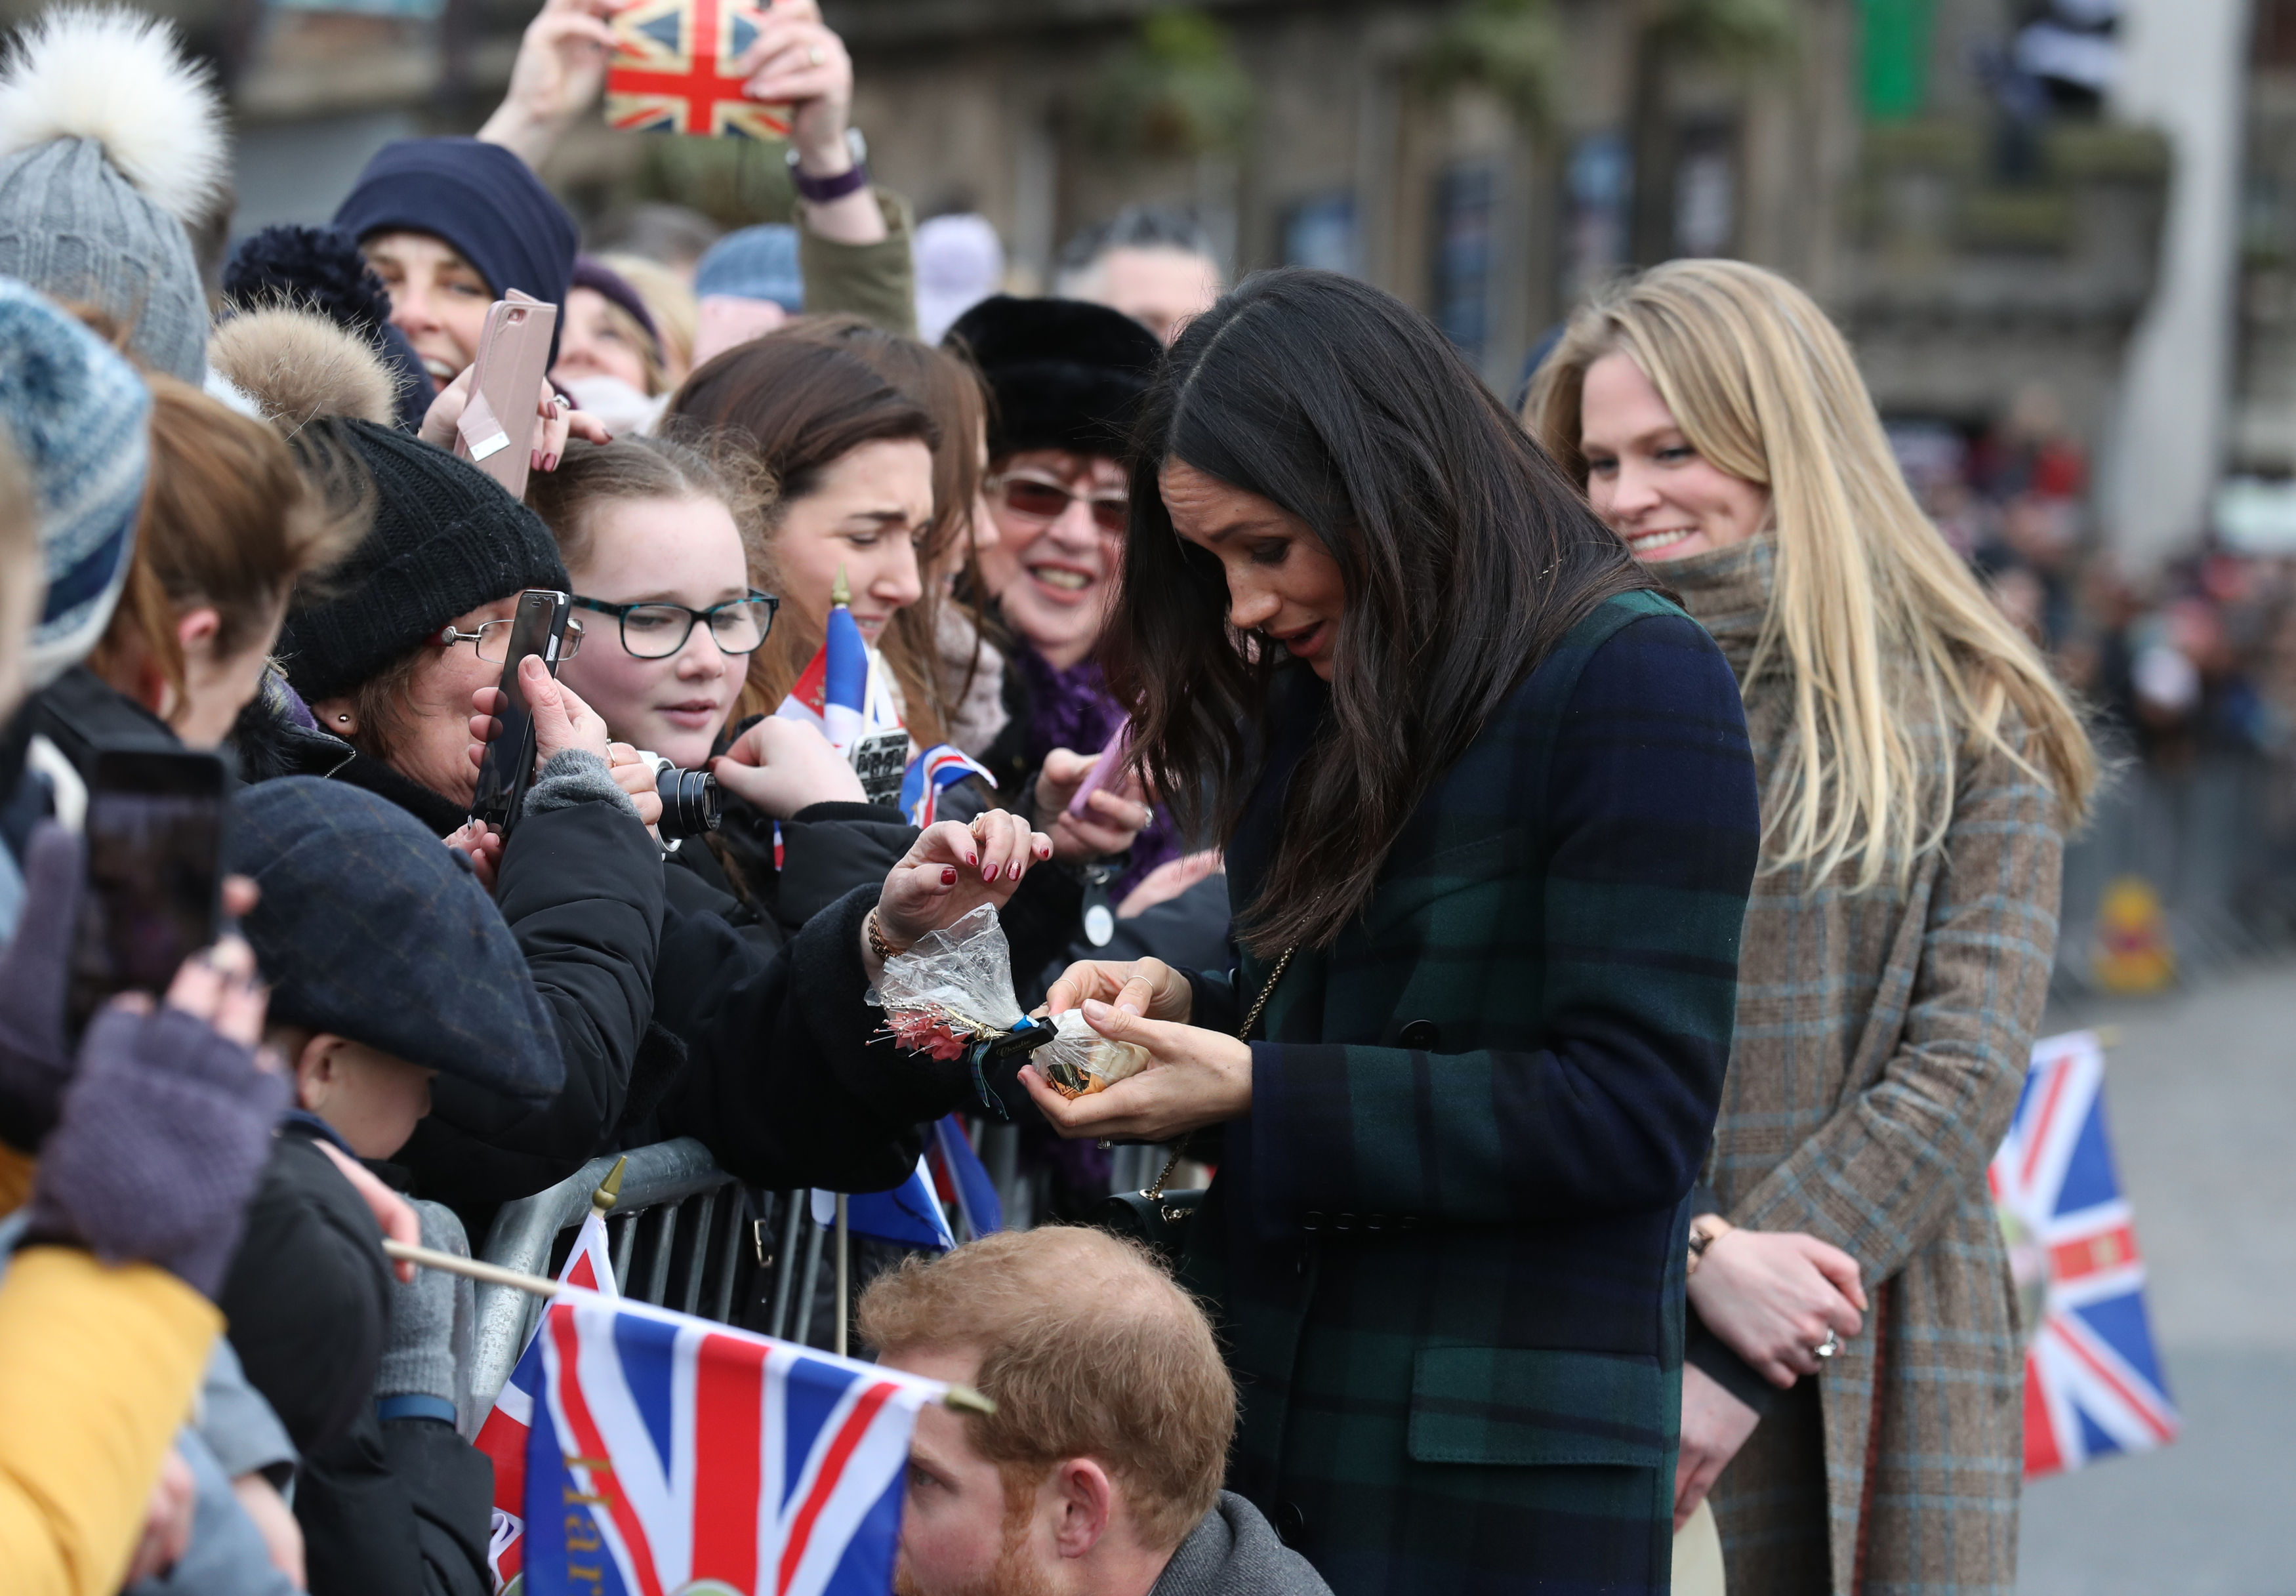 Meghan Markle in a tartan coat during a walkabout (Andrew Milligan/PA)